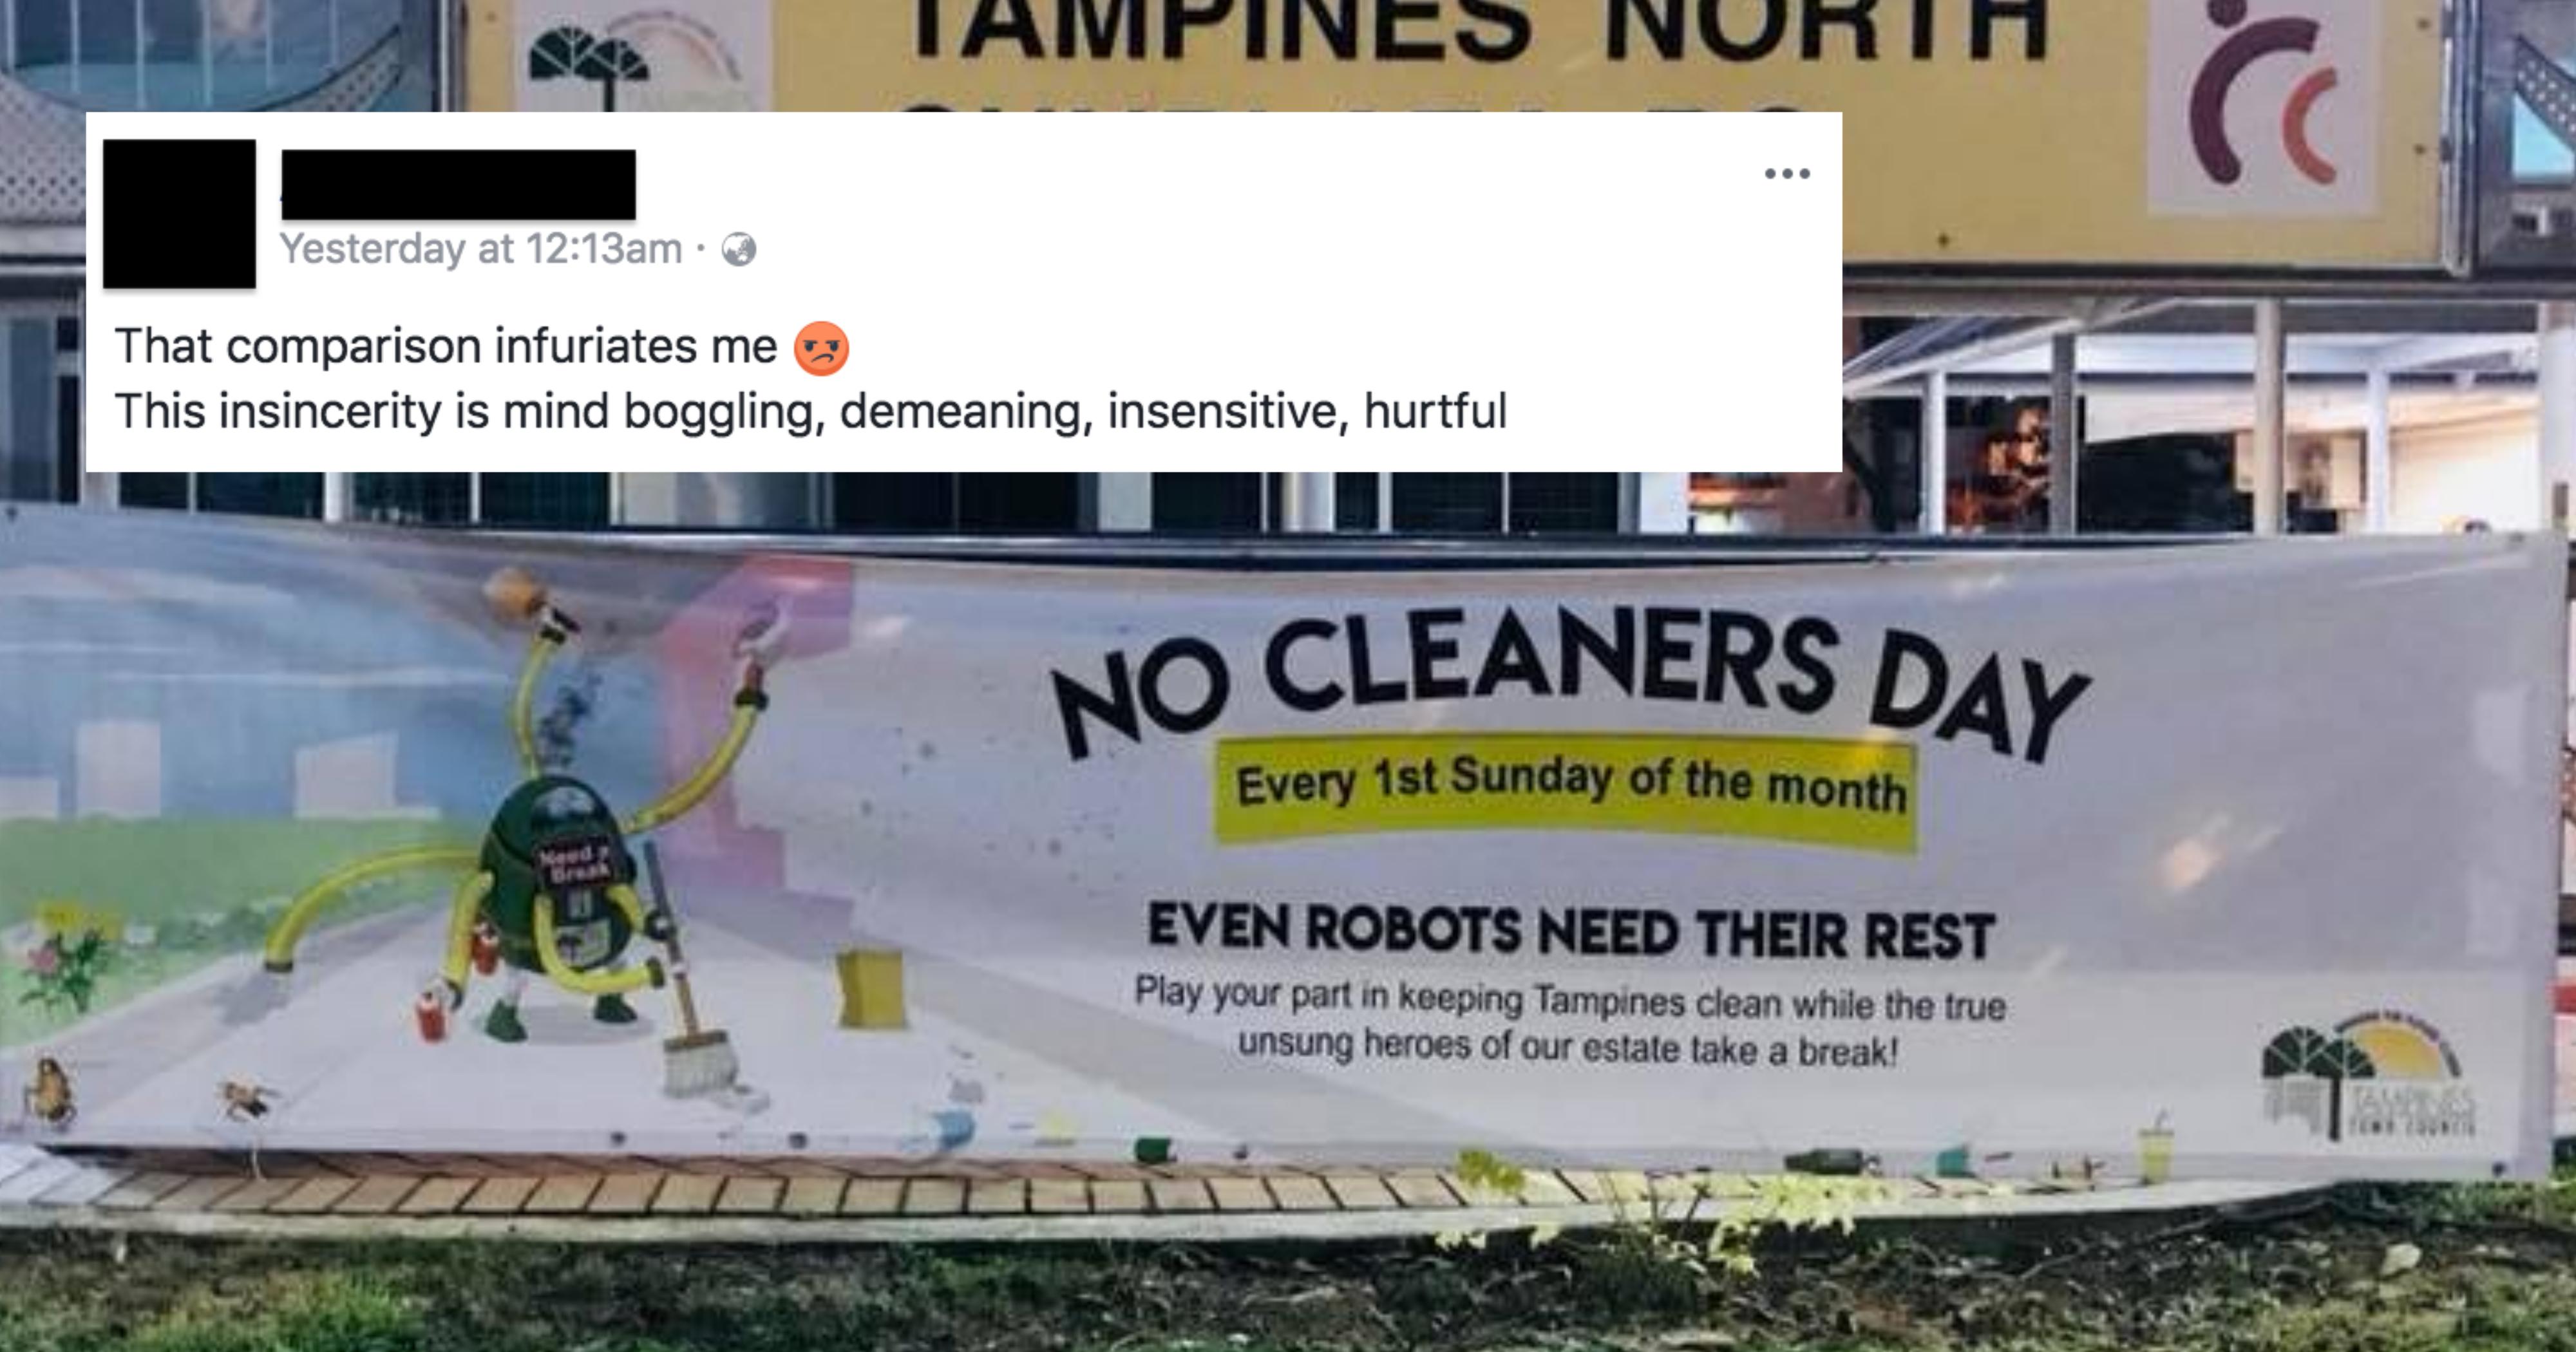 S’pore man sees “No Cleaners Day” banner with slogan about robots, gets offended